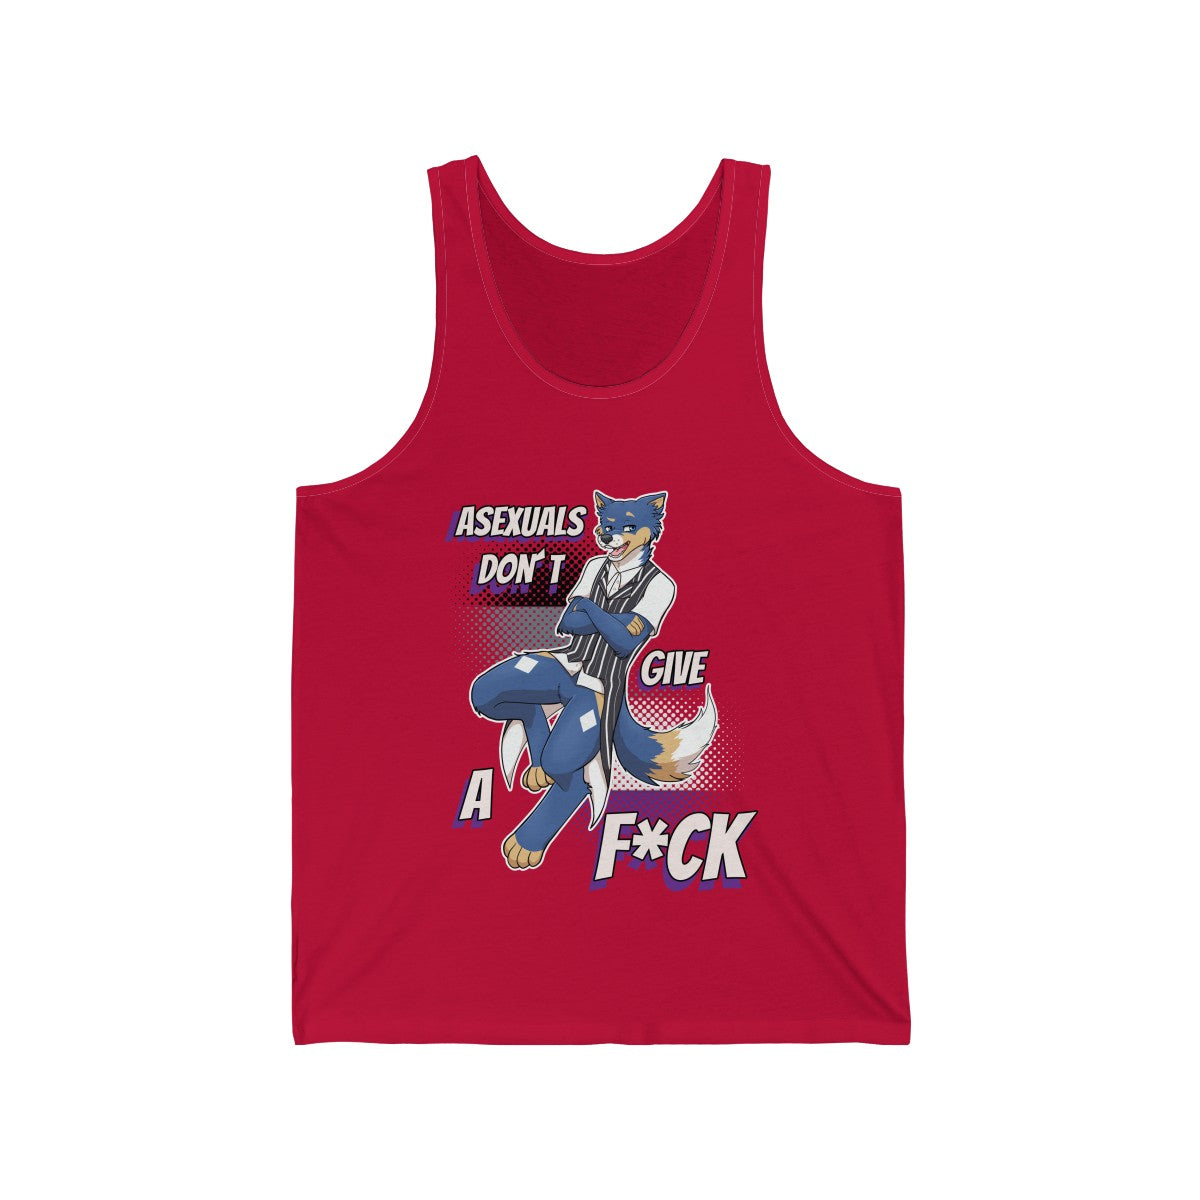 Asexual Don't Give A F*ck - Tank Top Tank Top Artemis Wishfoot Red XS 